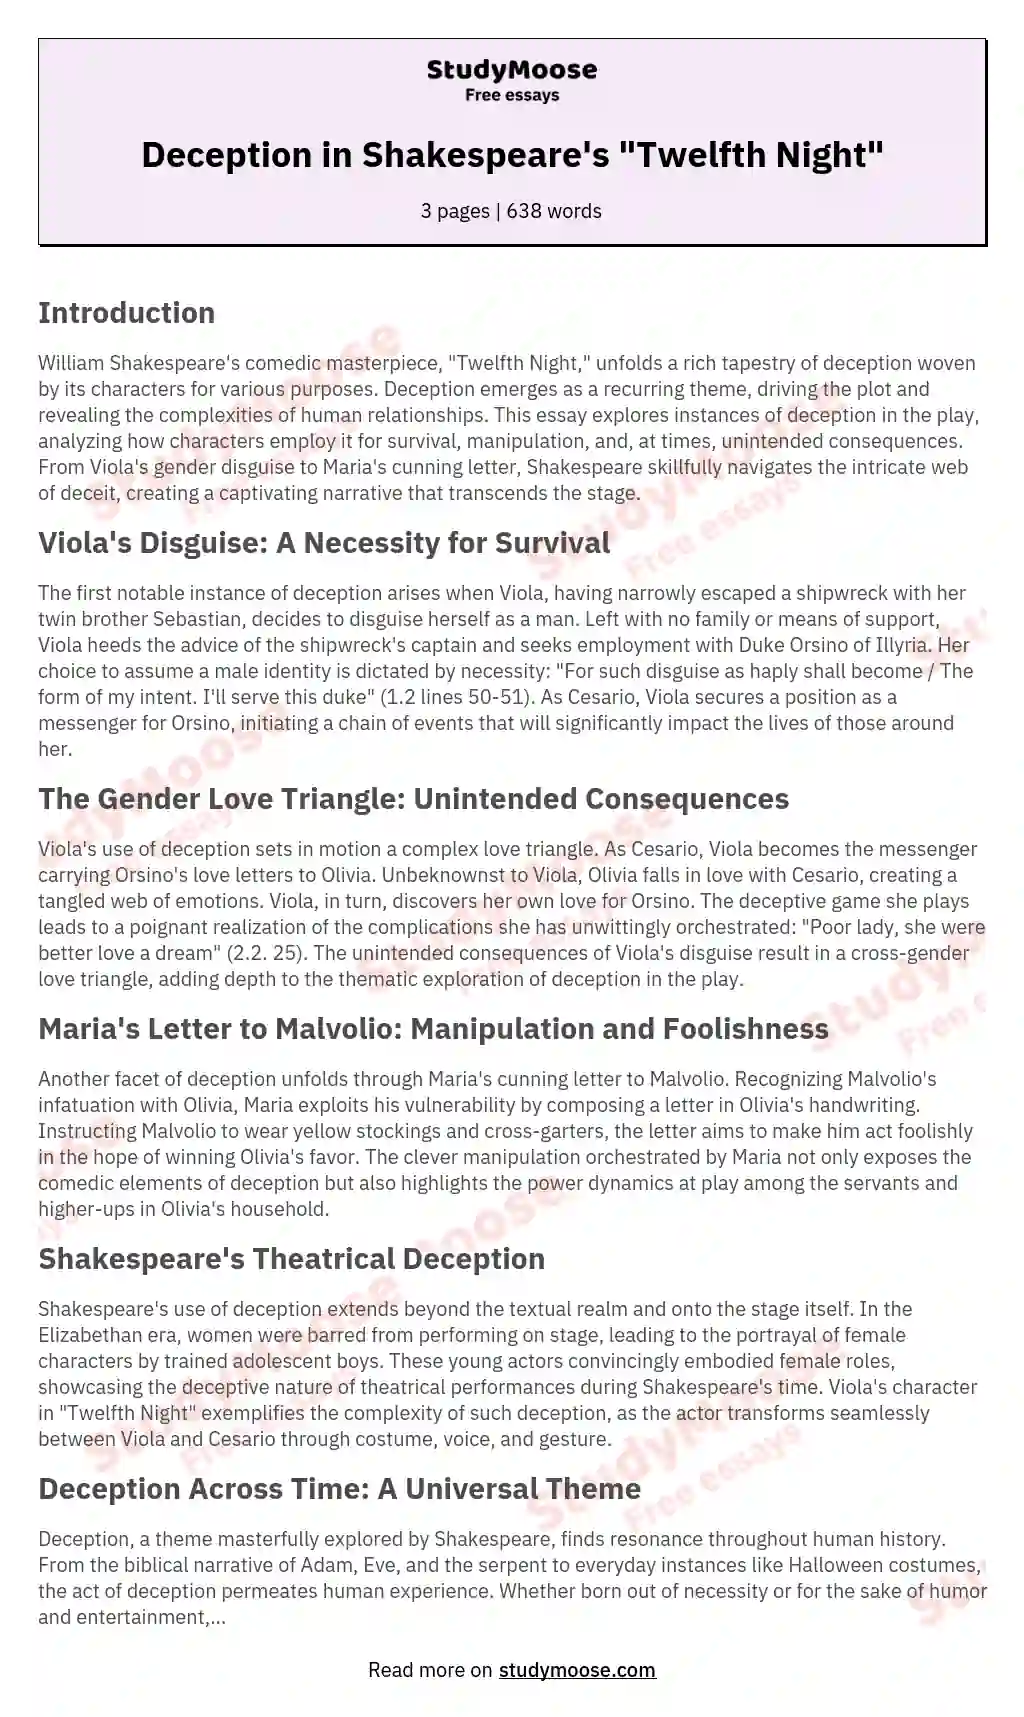 titles for an essay about deception